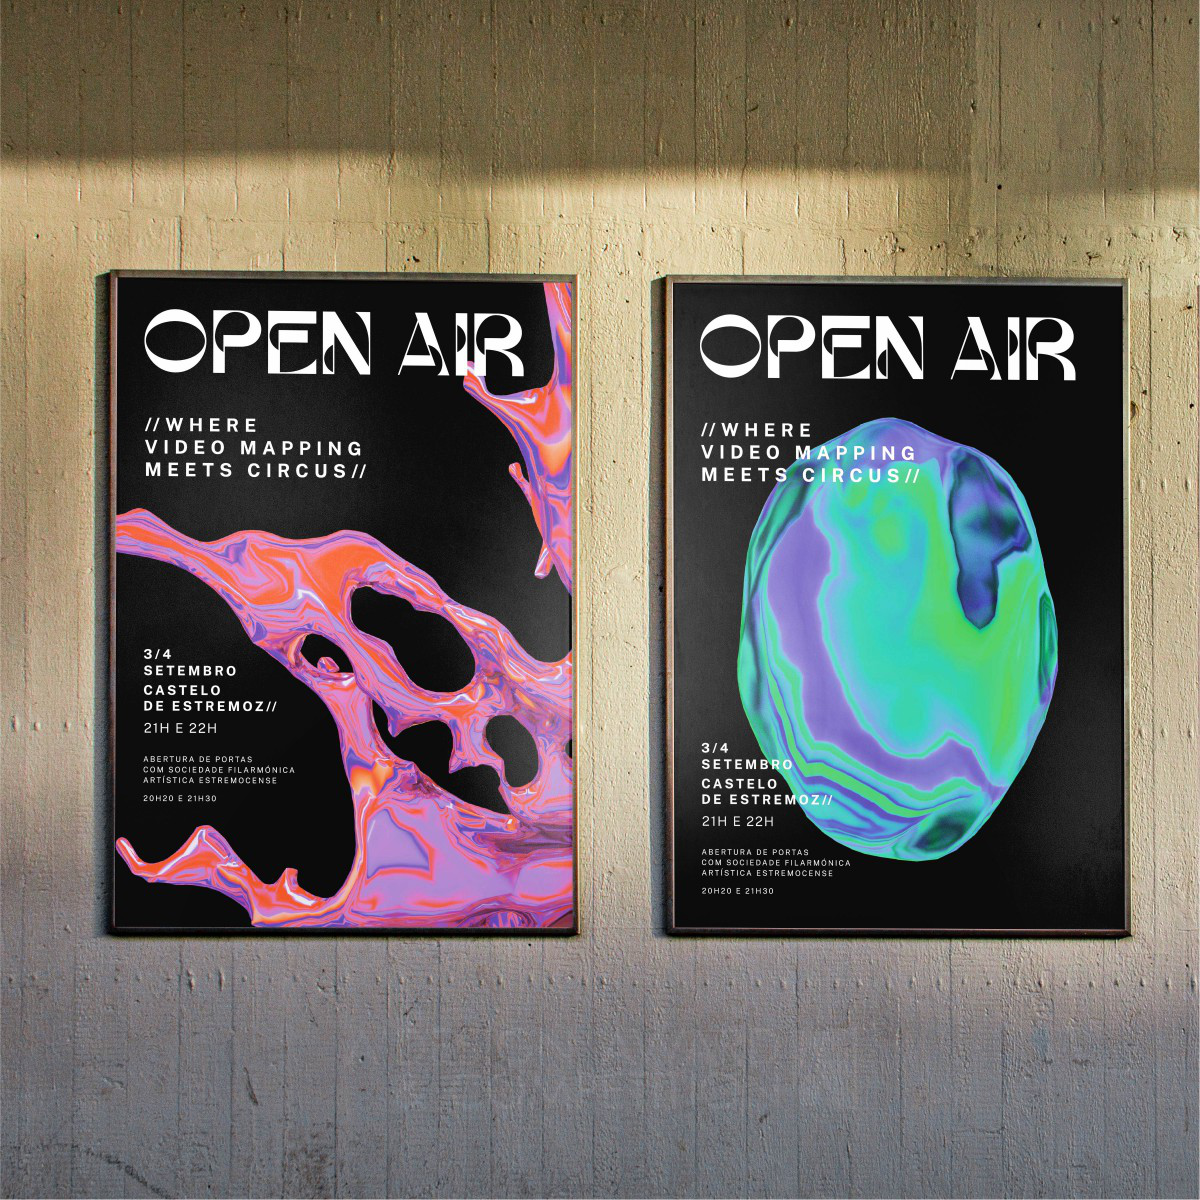 Open Air Corporate Identity by AnaFatia